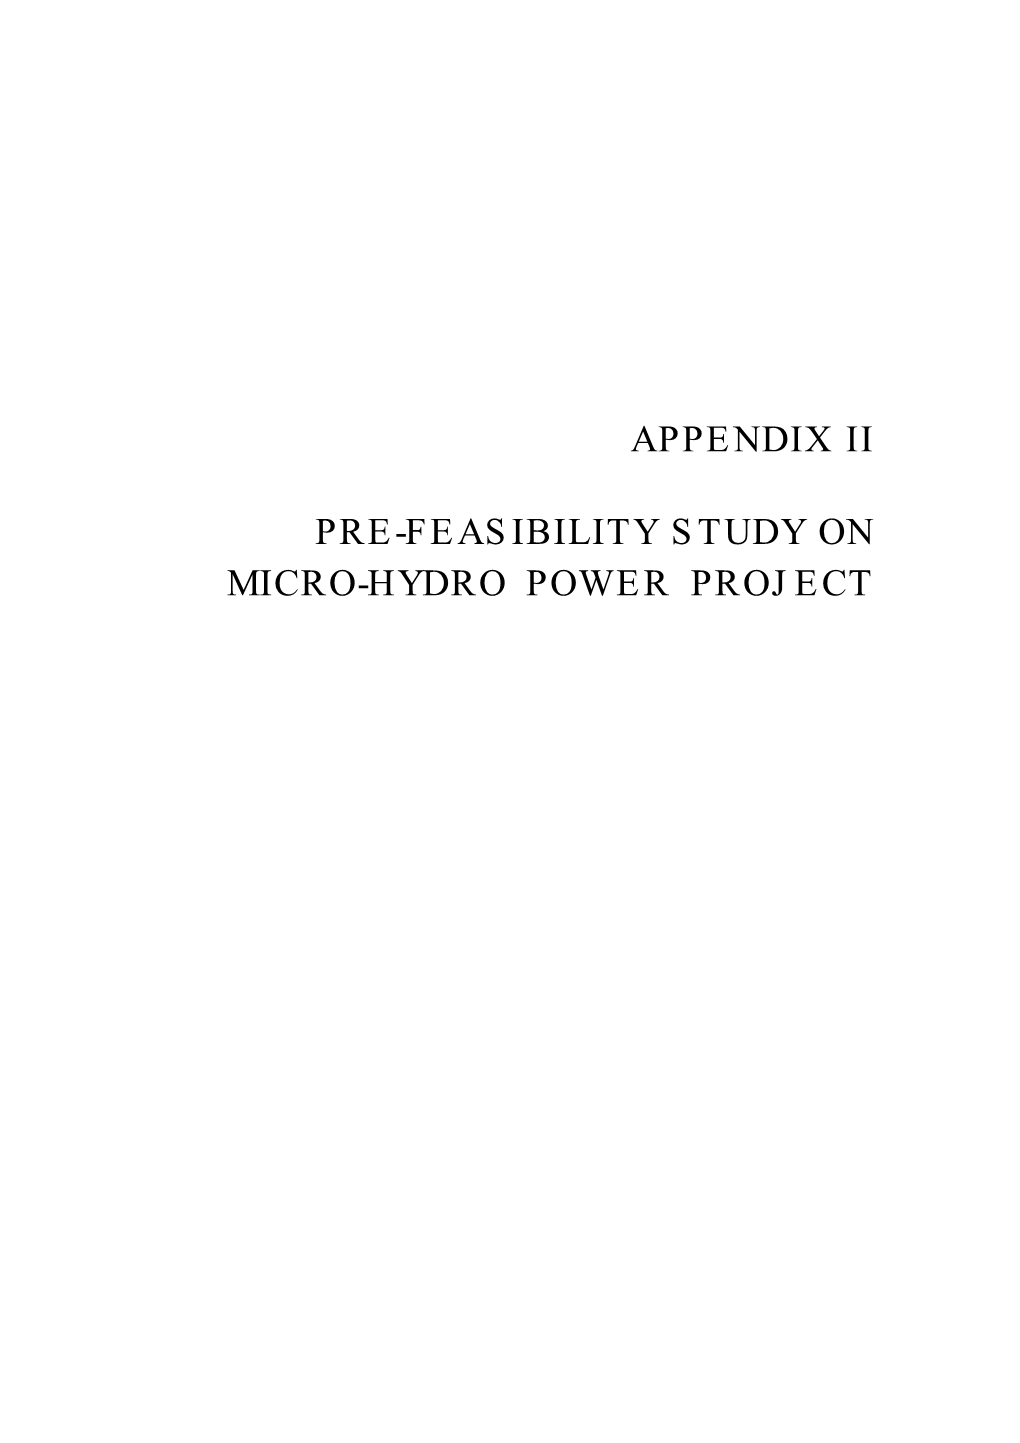 Appendix Ii Pre-Feasibility Study on Micro-Hydro Power Project